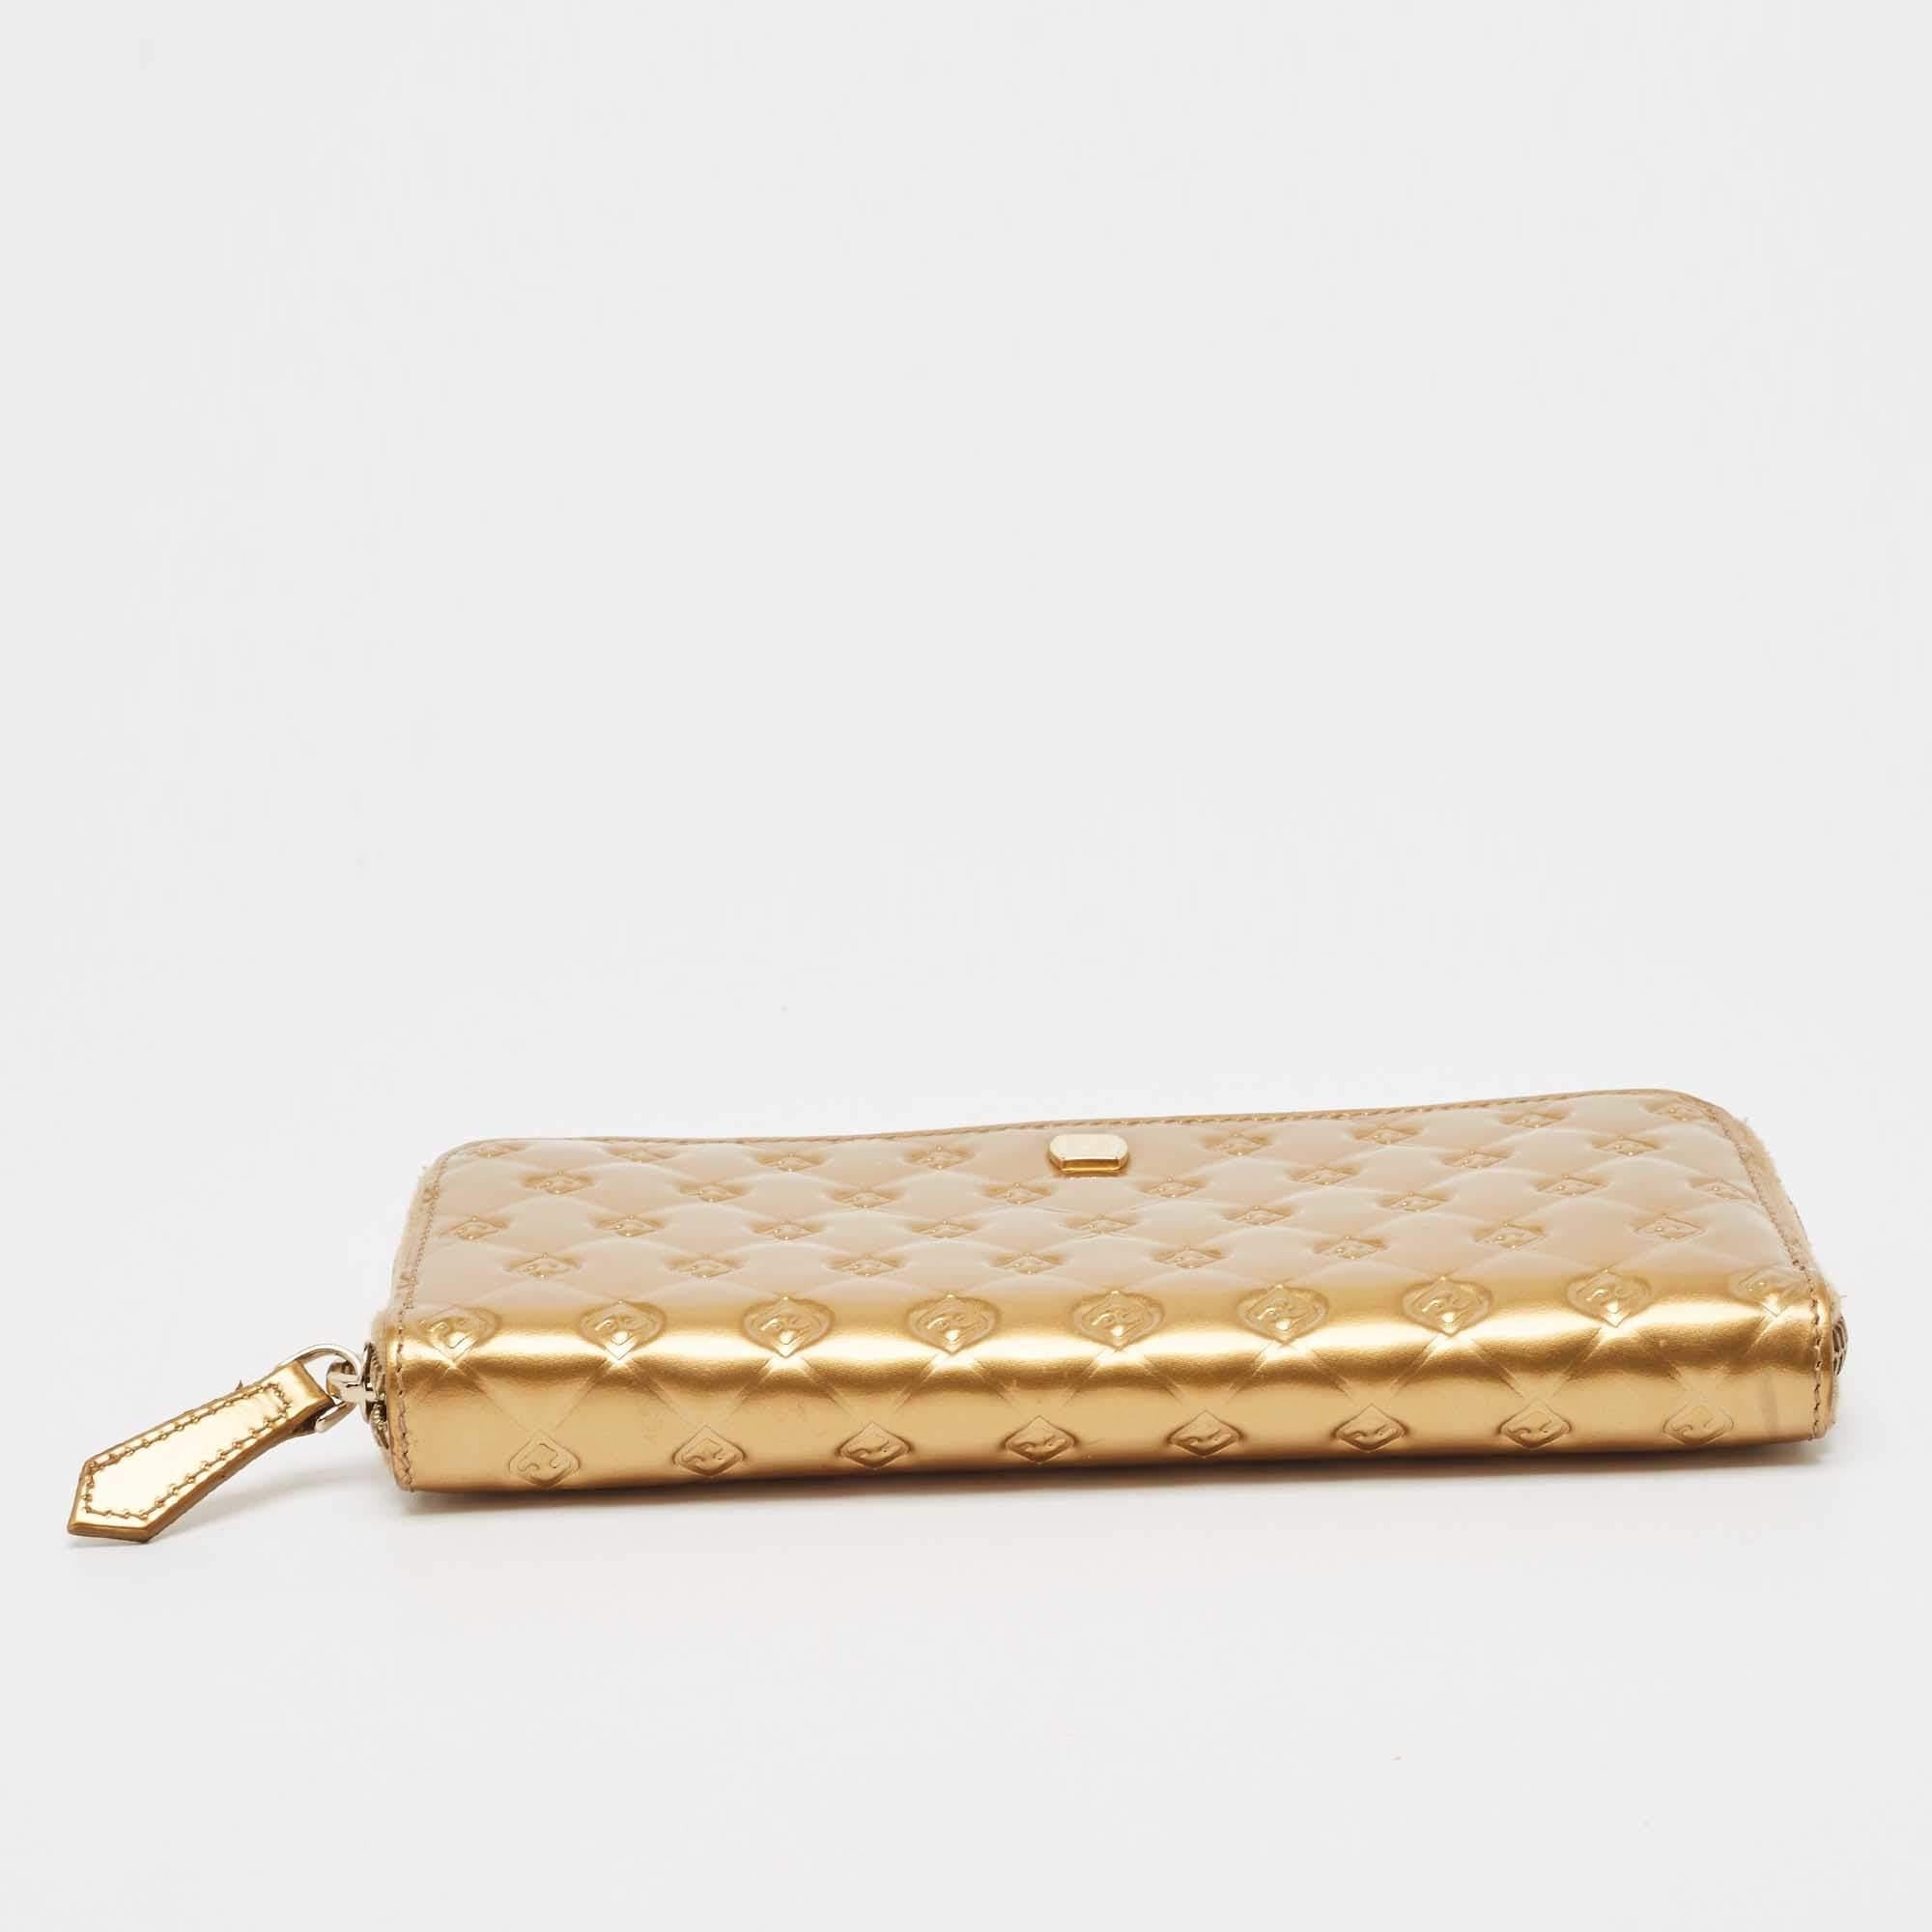 Women's Fendi Gold Embossed Patent Leather Fendilicious Continental Wallet For Sale